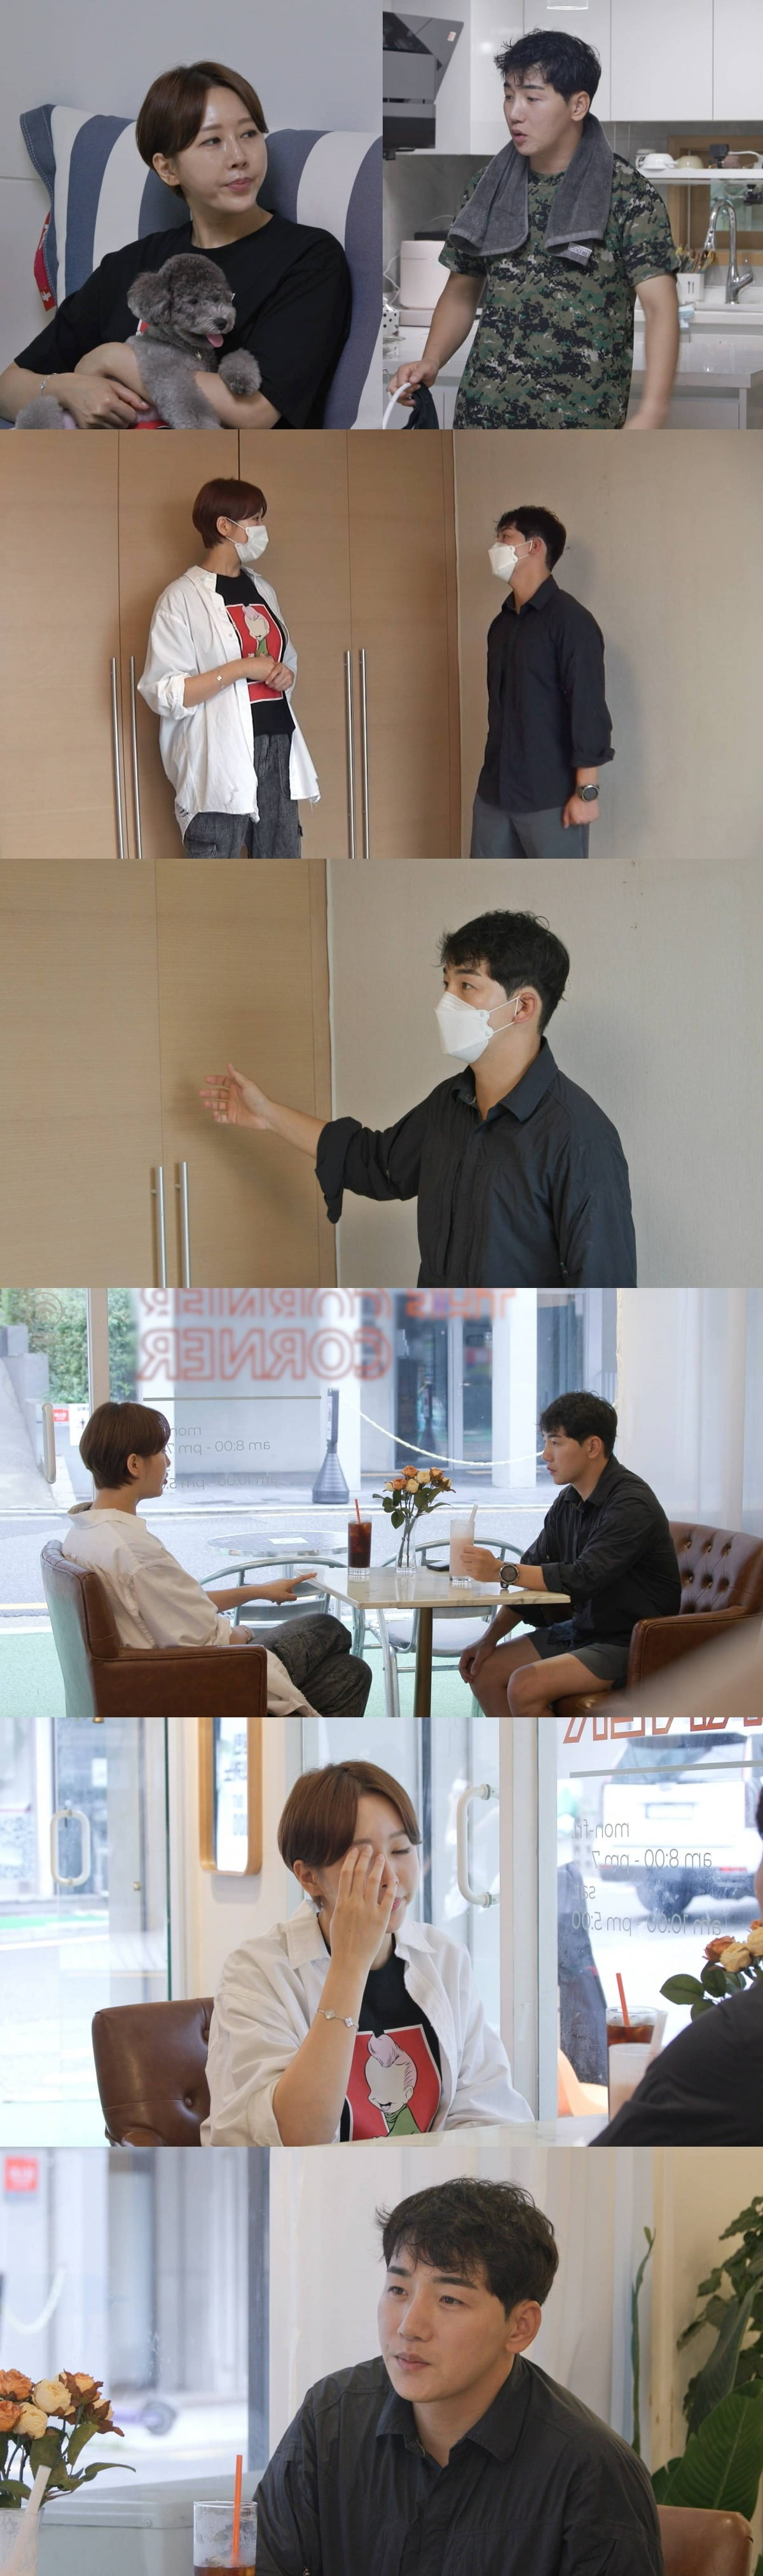 A conflict breaks out between Han-yeong and Park-gun before their move